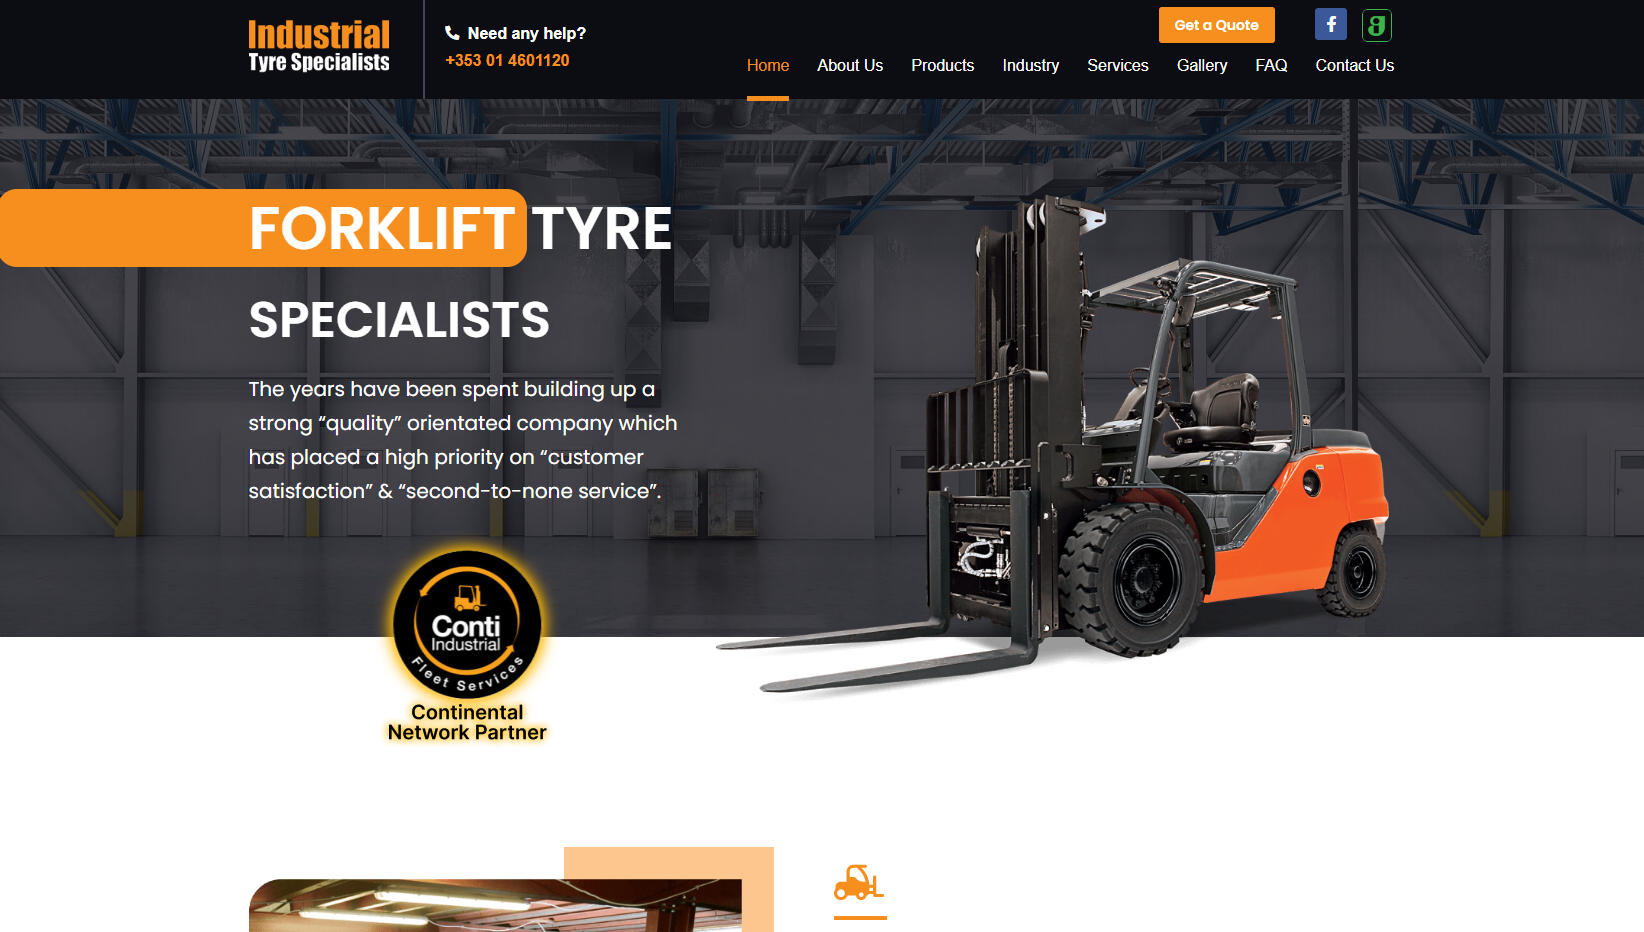 industrialtyres.ie launched by Industrial Tyre Specialists